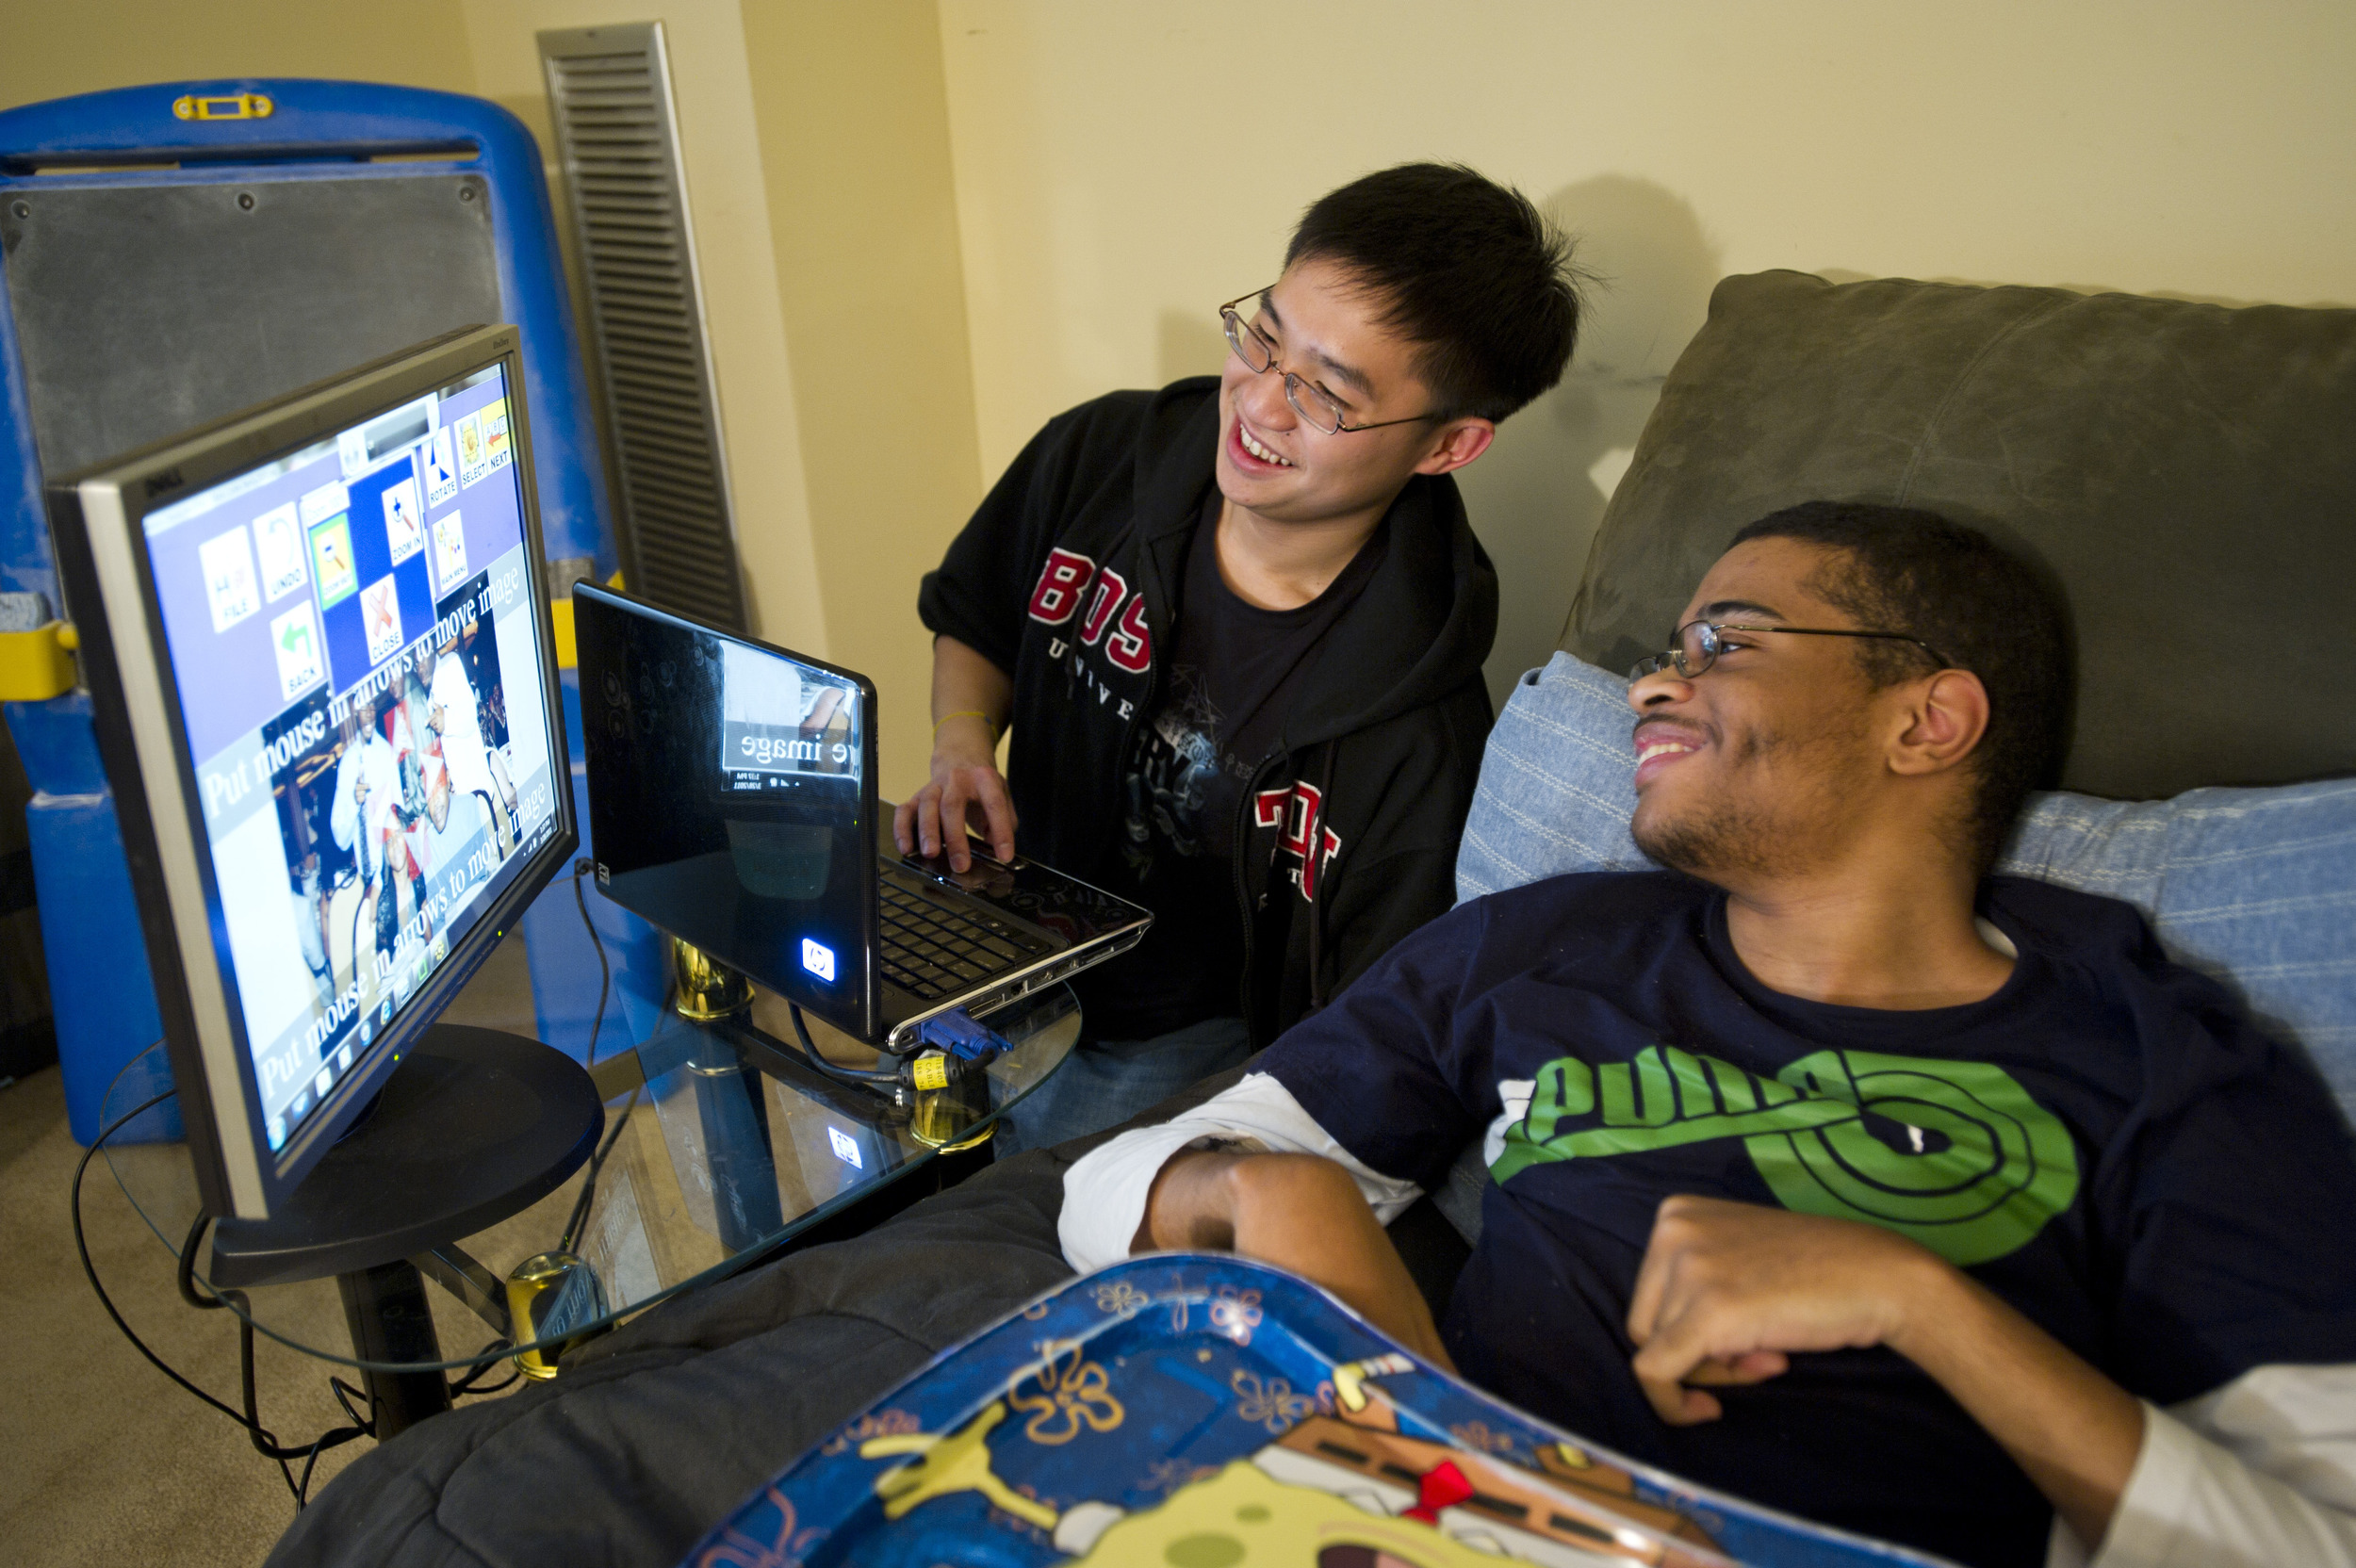  Chris Kwan, at left, is a computer science research student in UROP who is developing a software that allows users will mobility impairments to edit photos. Here, Kwan shows his software to Corey Petitt of Boston and has him try out they editing sys